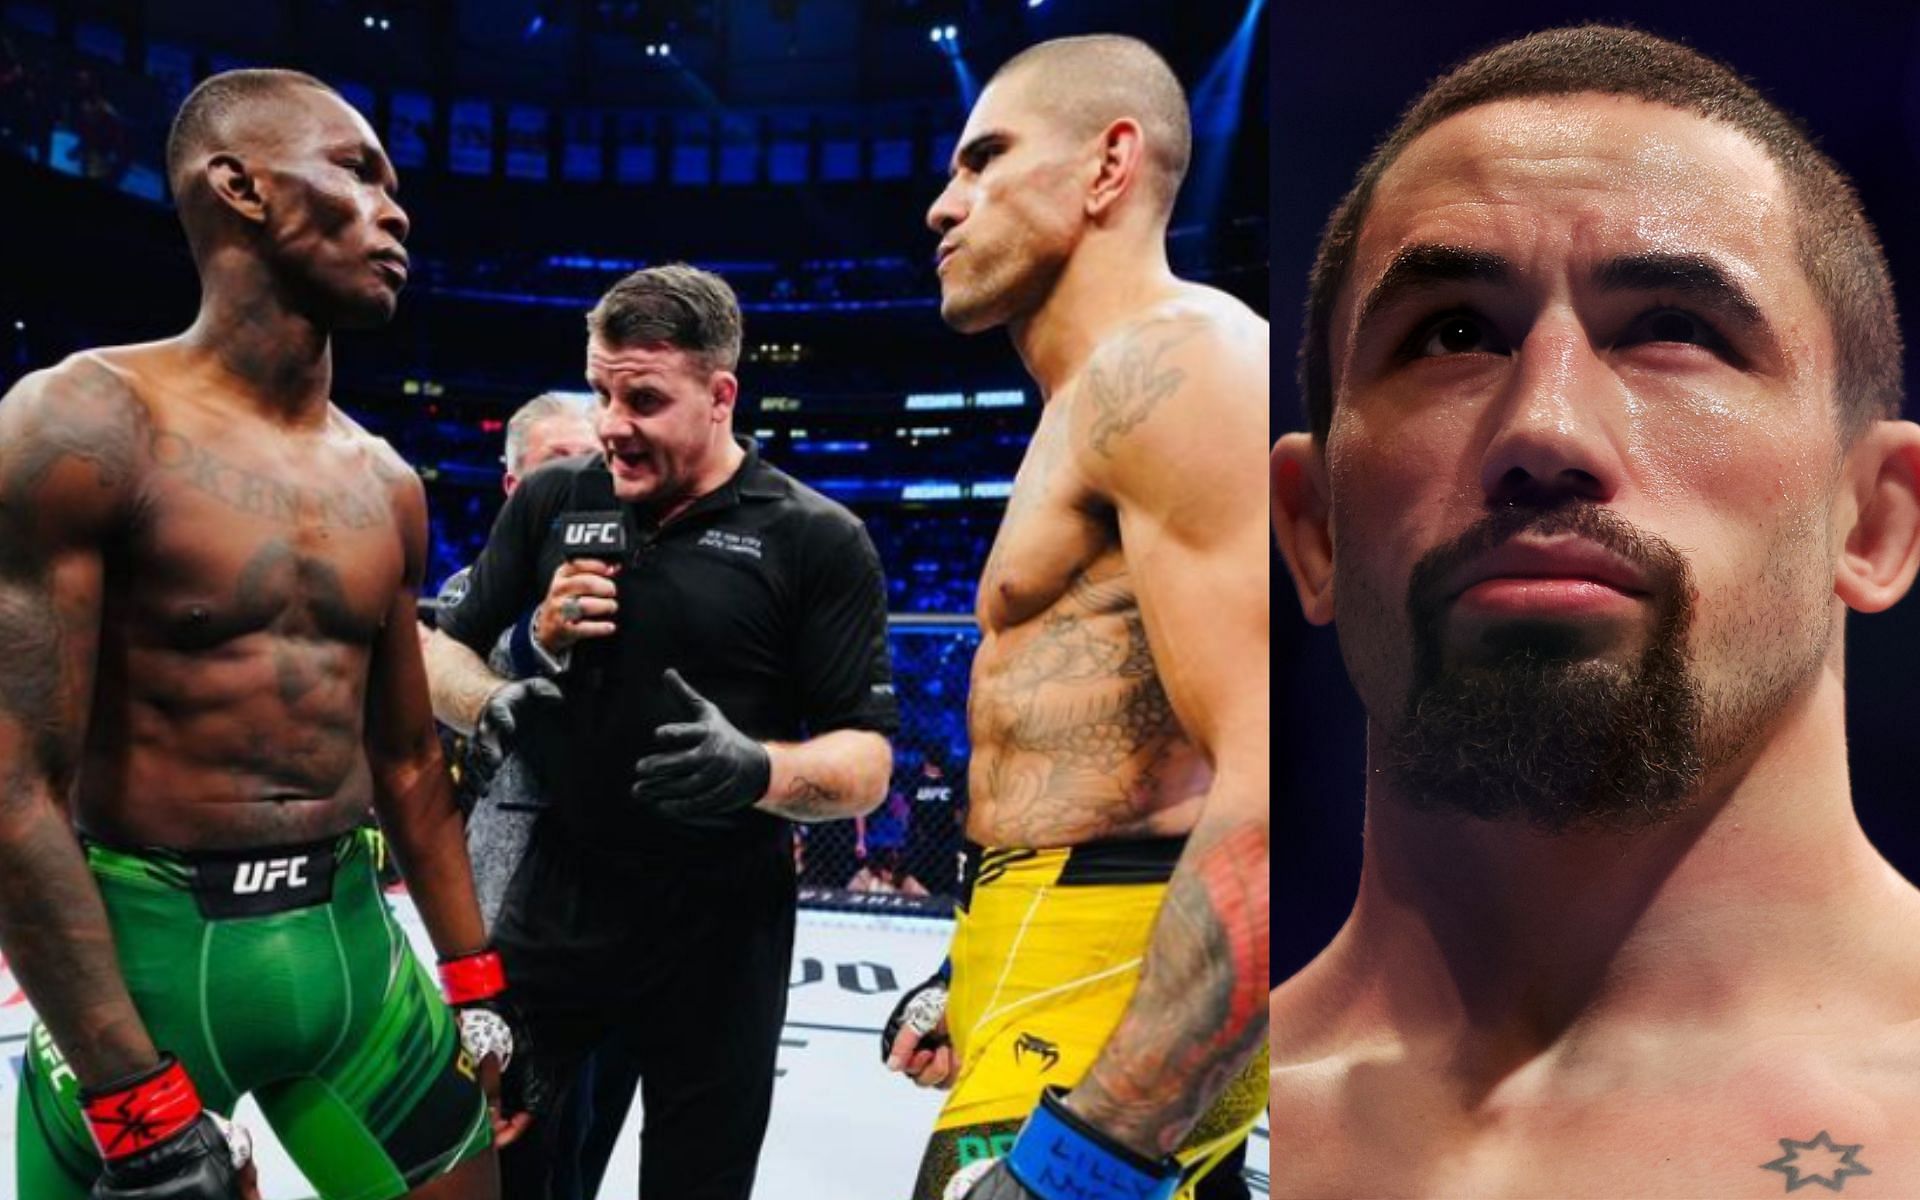 Israel Adesanya vs. Alex Pereira (left) and Robert Whittaker (right). [Images courtesy: left image from Instagram @stylebender and right image from Getty Images]